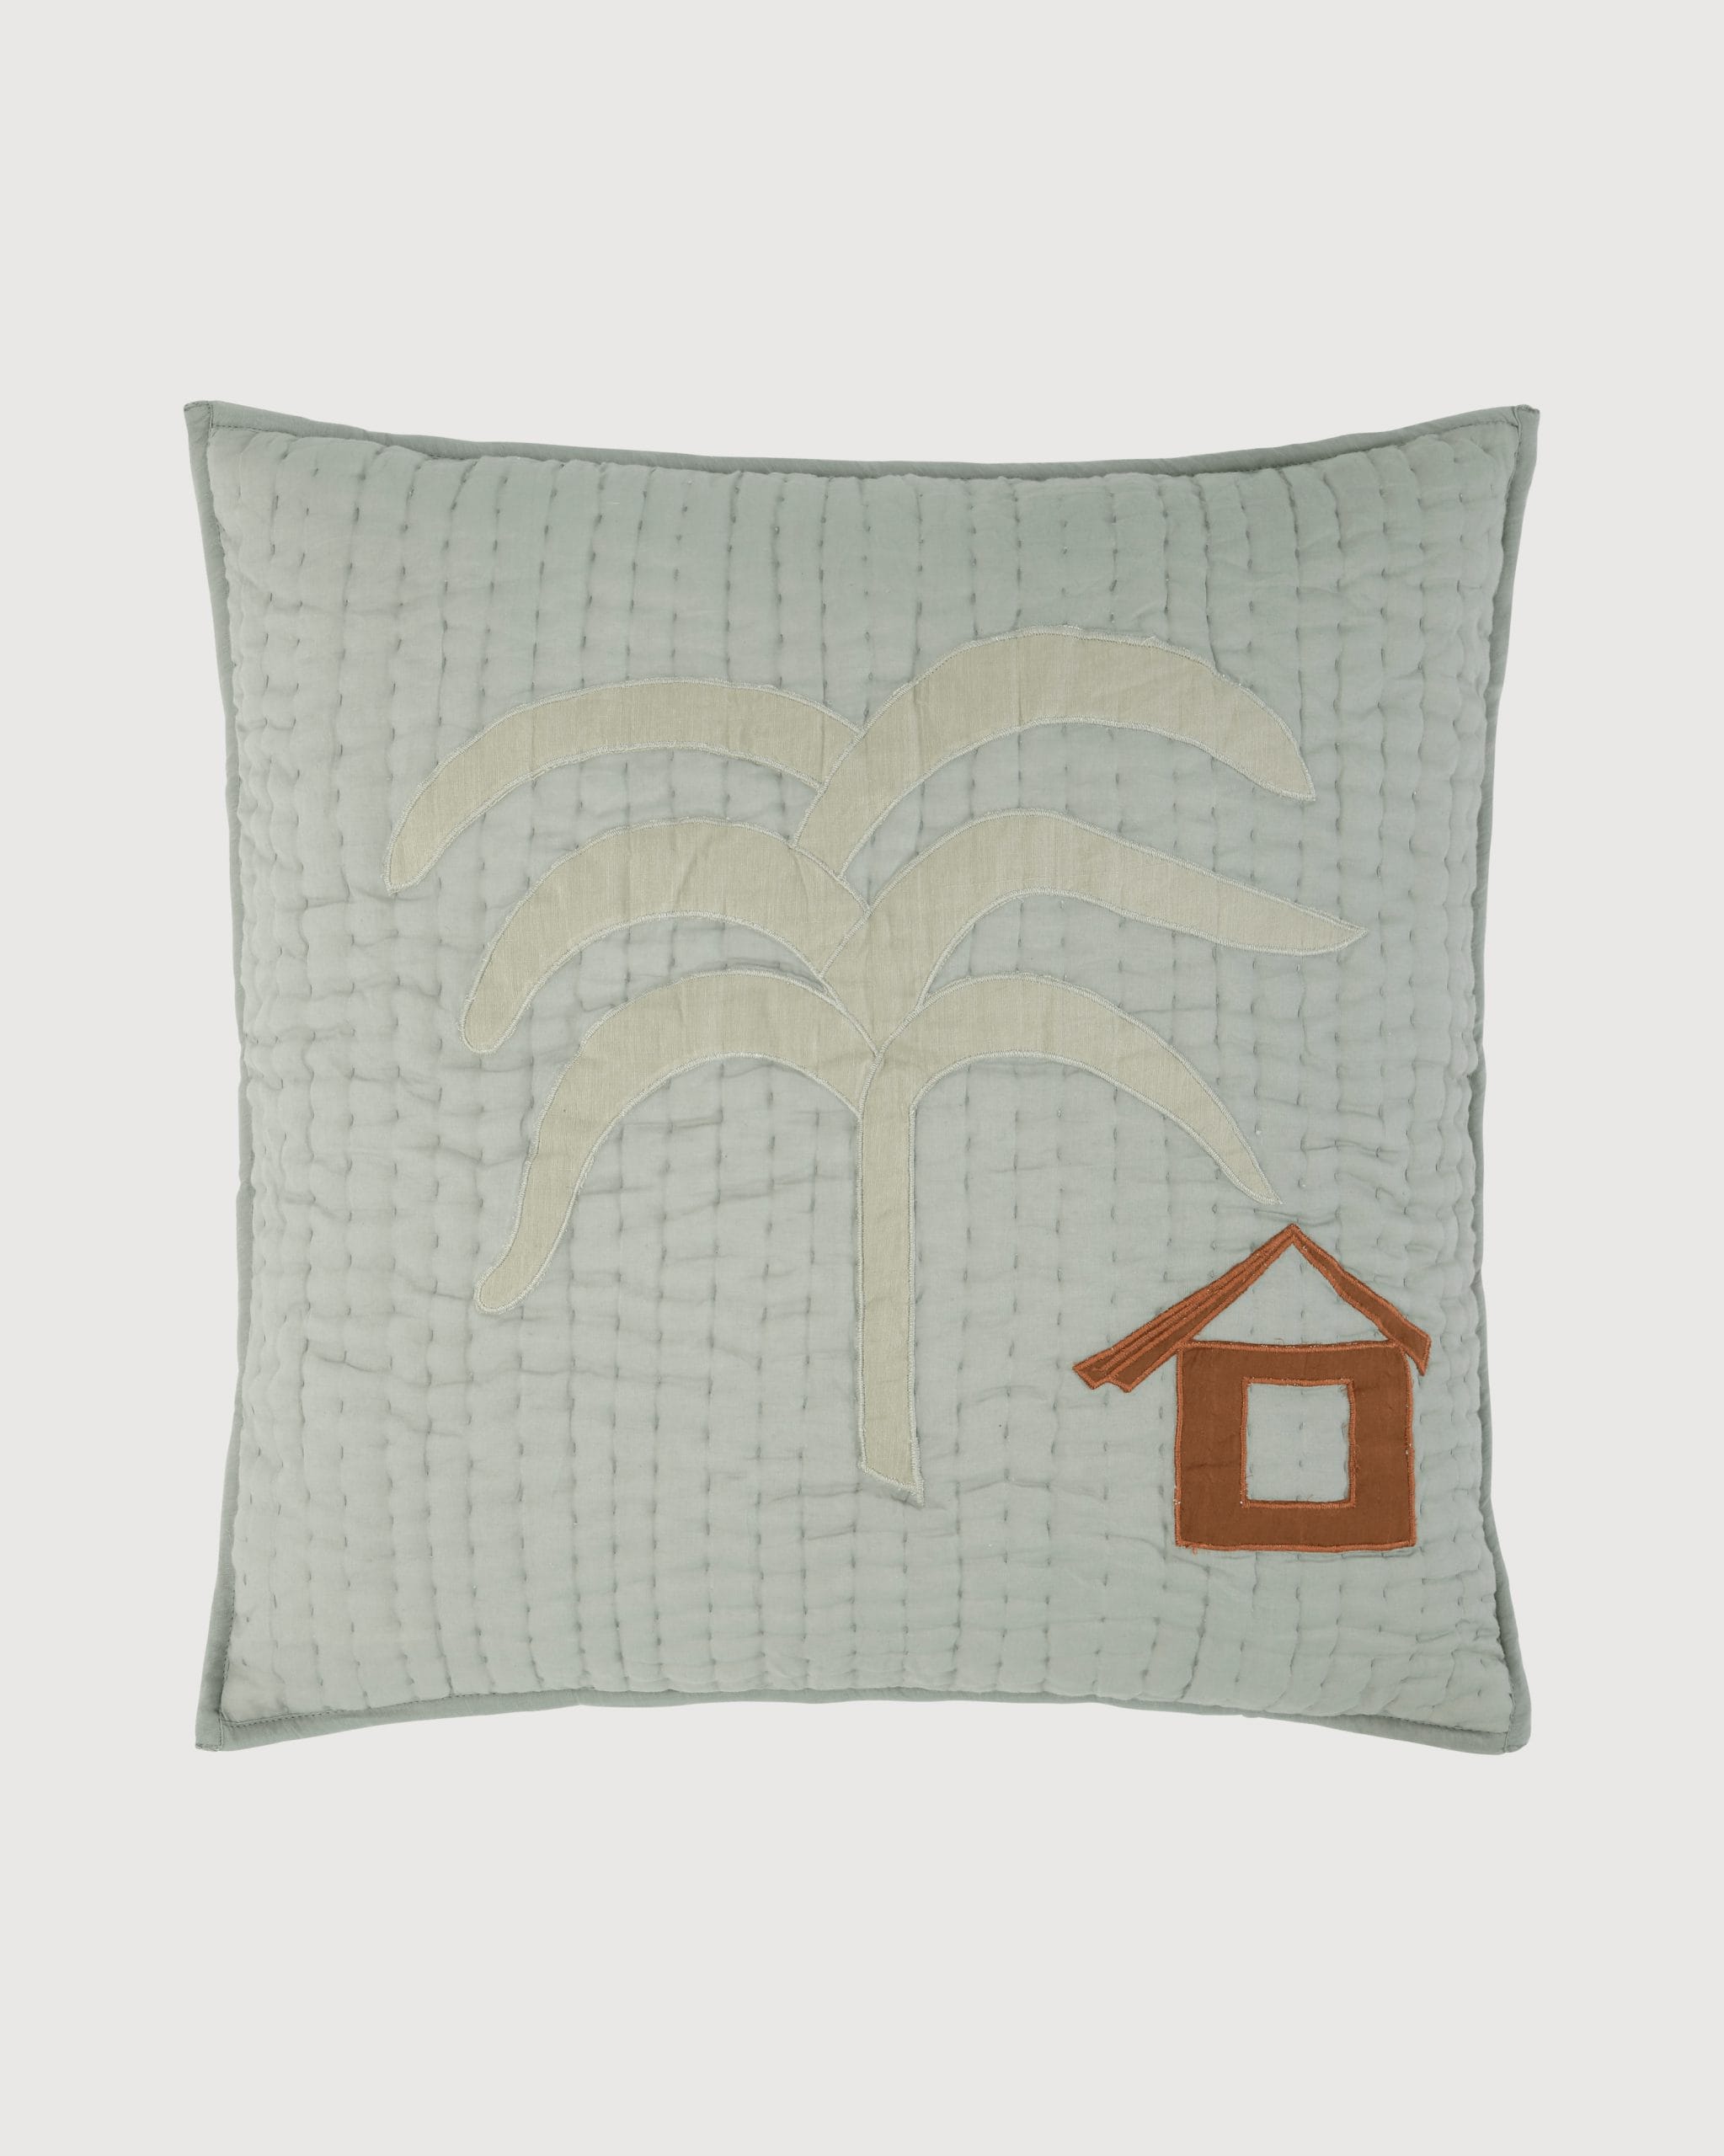 Bongusta, Product image, Banana Tree Quilted Pillow, 1 of 3}